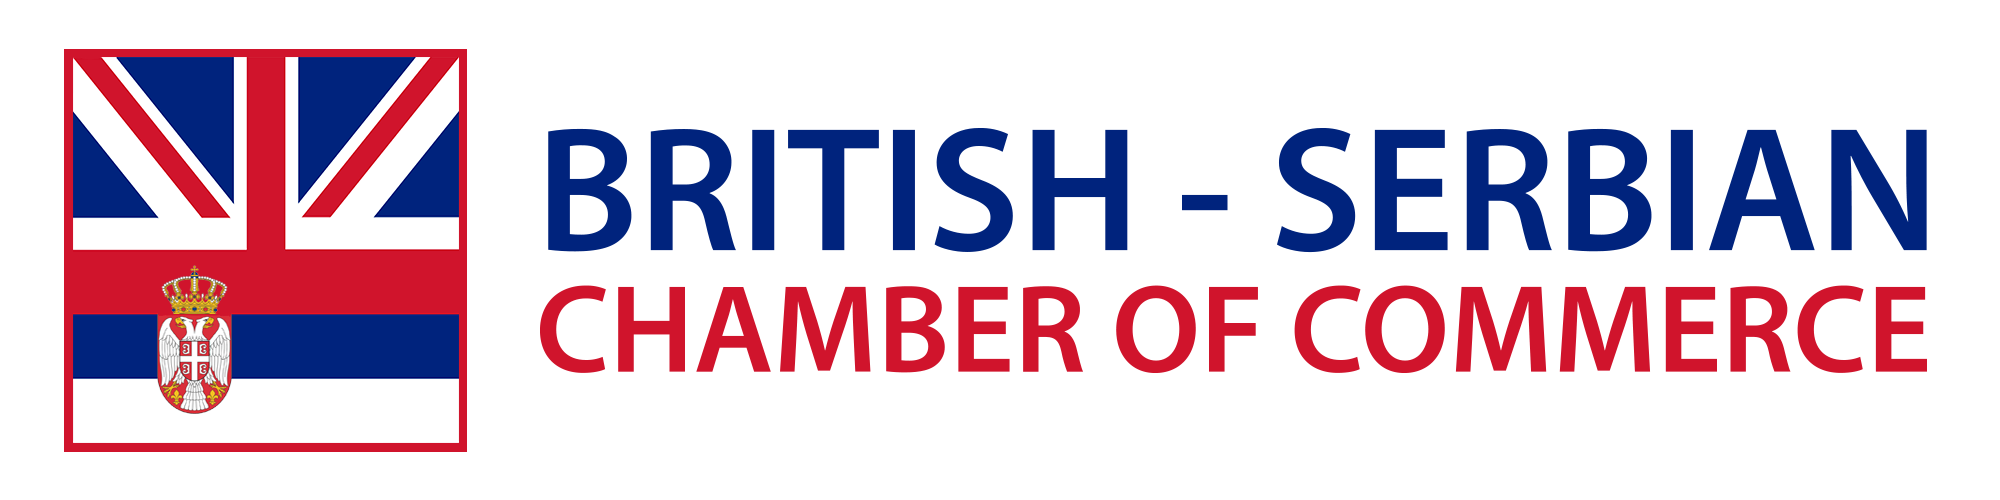 British-Serbian Chamber of Commerce - BSCC